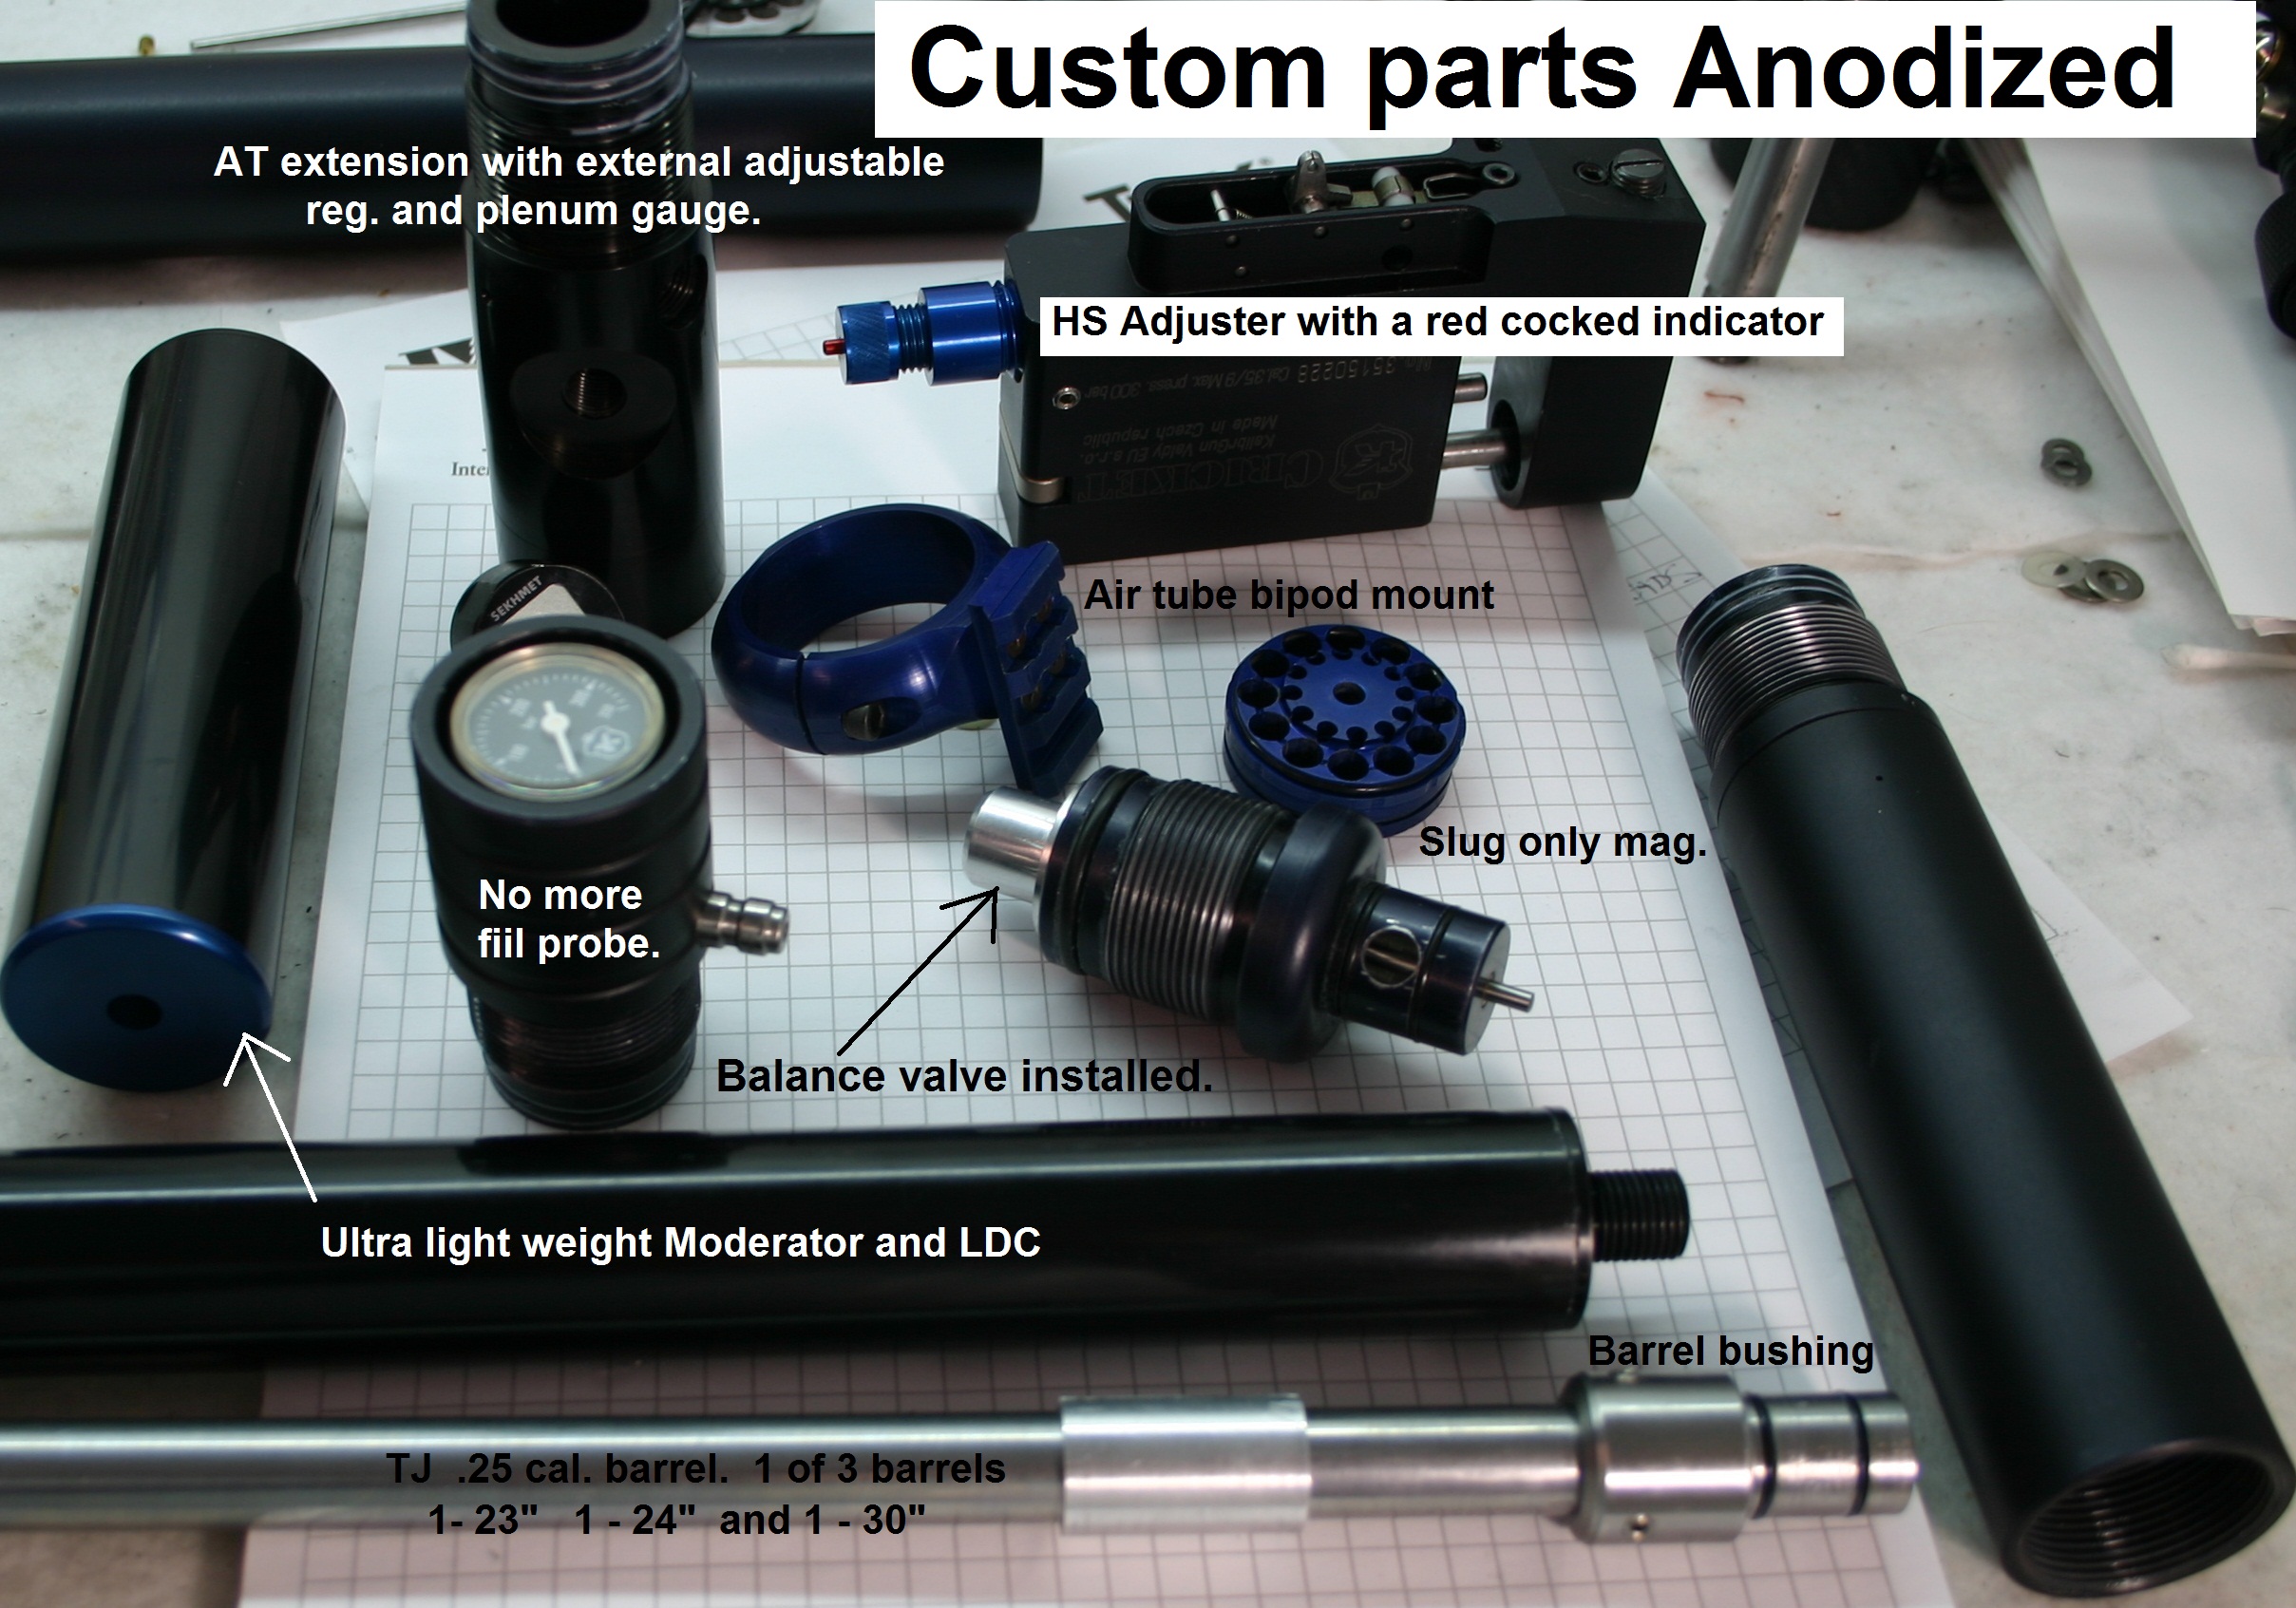 1Anodized parts.jpg